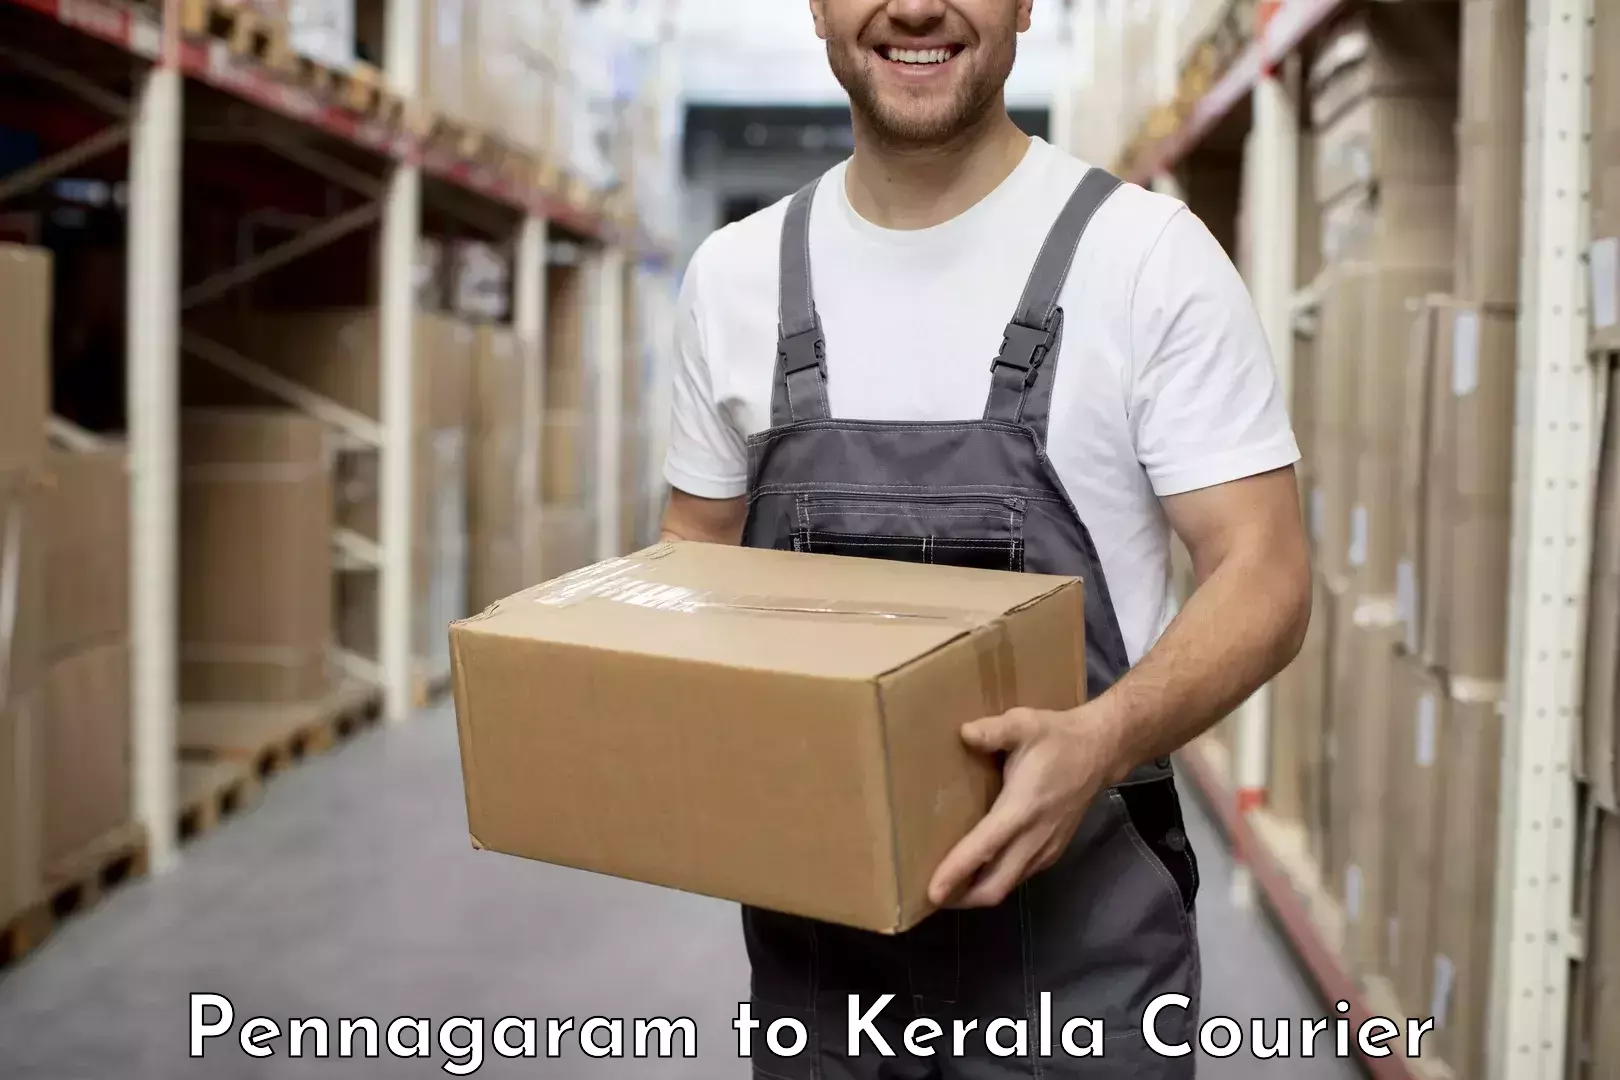 Sustainable courier practices Pennagaram to Kerala